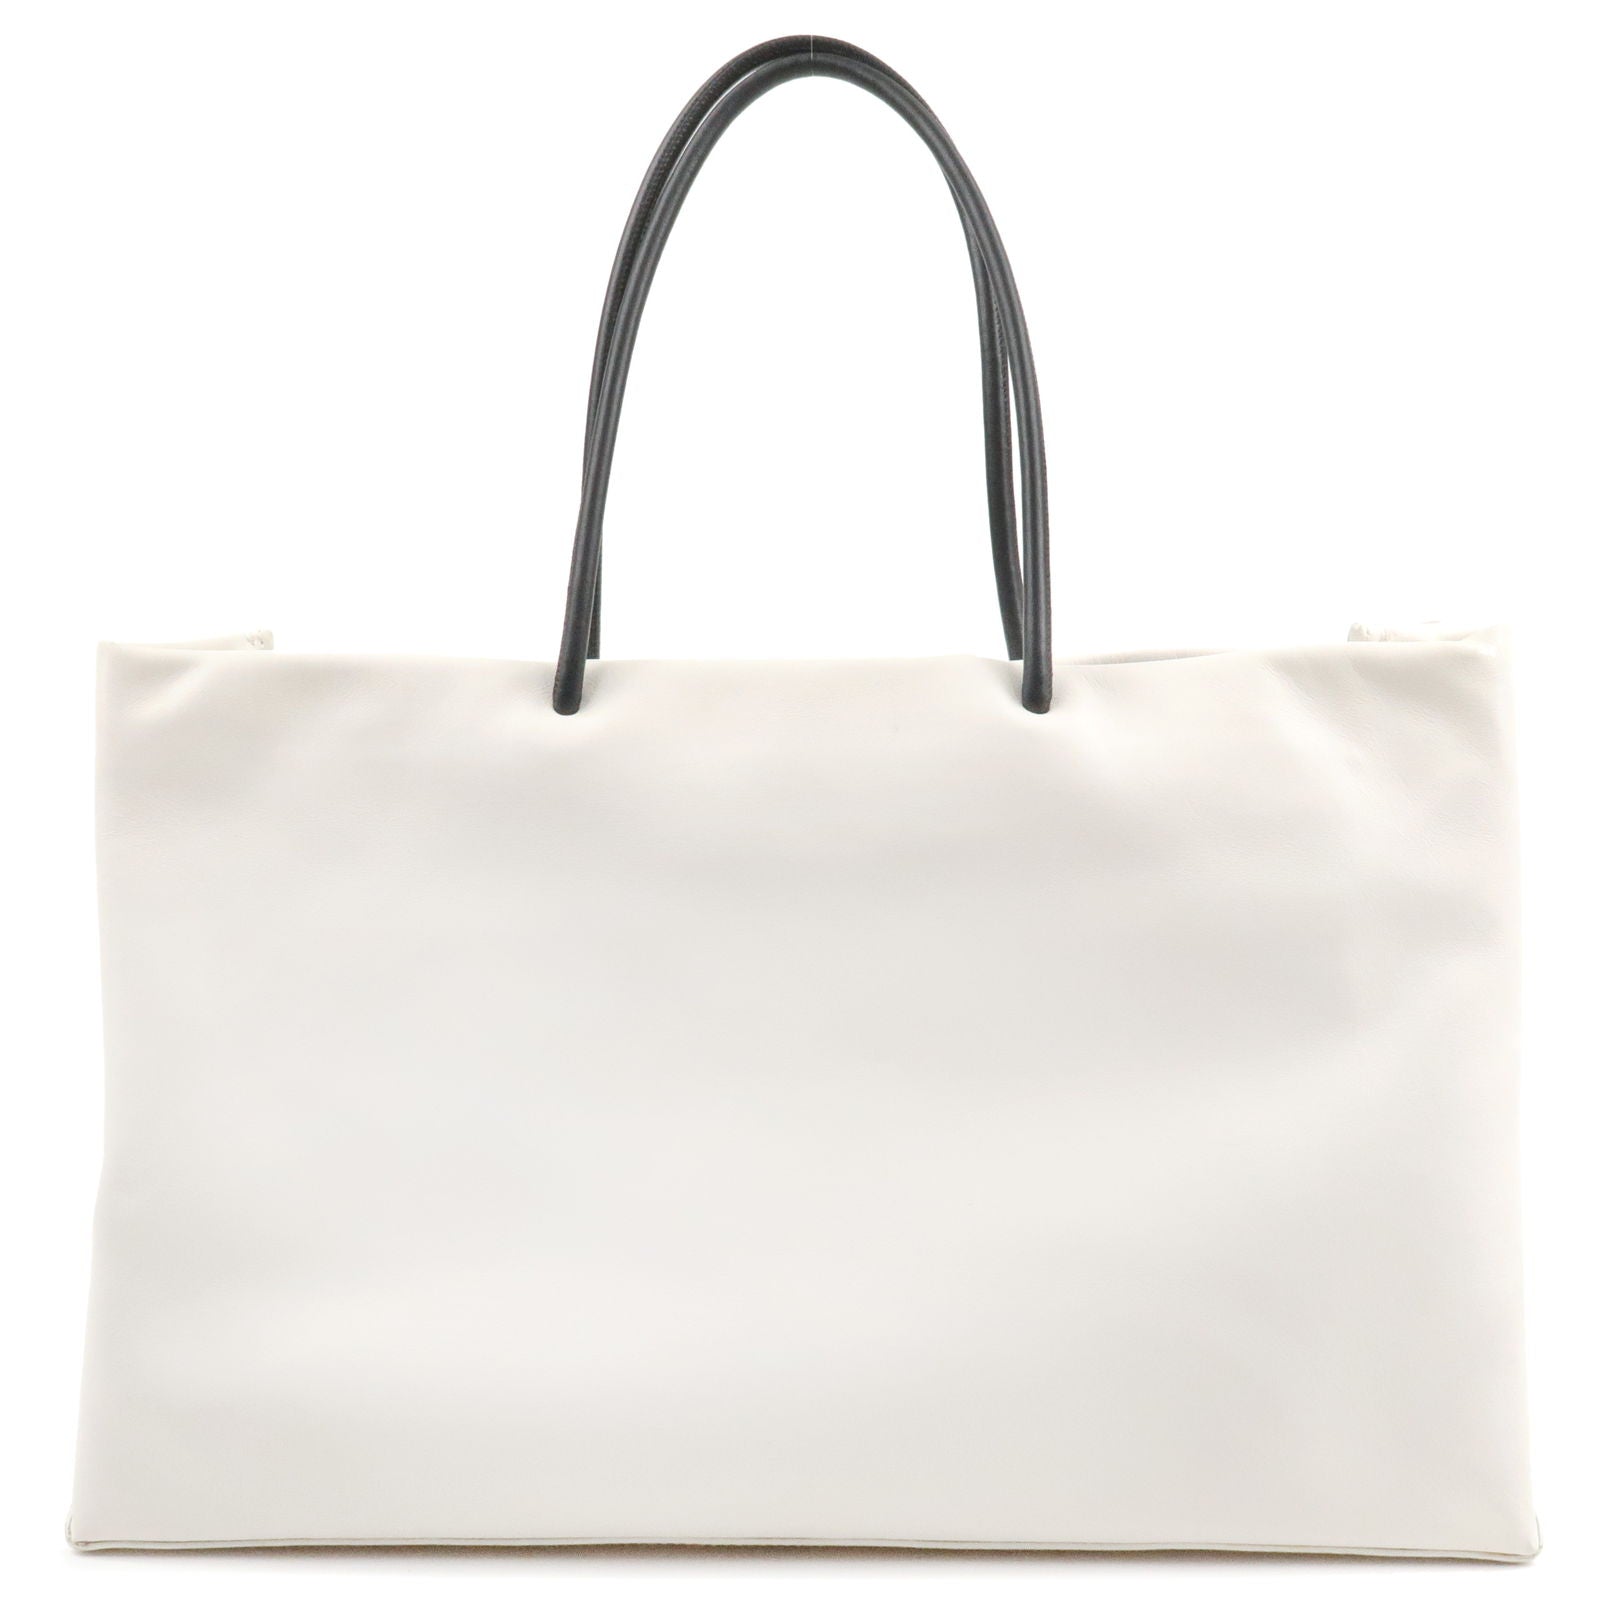 Chanel Large Tote A66941 B10017 NL722, White, One Size